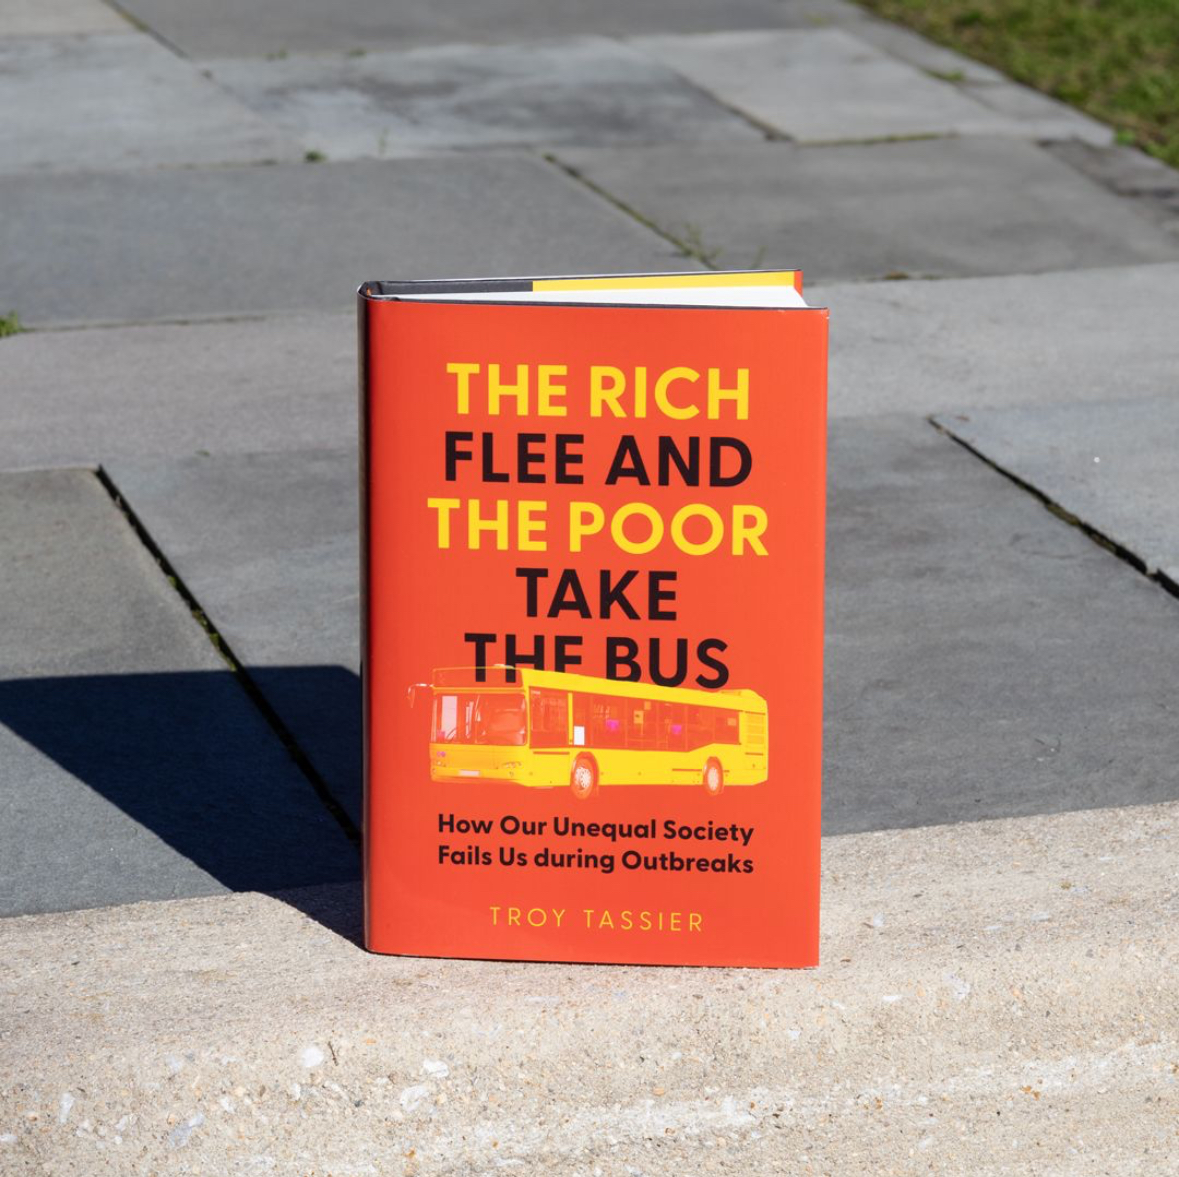 Now available as an audiobook: The Rich Flee and the Poor Take the Bus: How Our Unequal Society Fails Us during Outbreaks from @TantorAudio & @WFHowes audible.com/author/Troy-Ta… @kkperezbooks @RobinWColeman @zenoagency